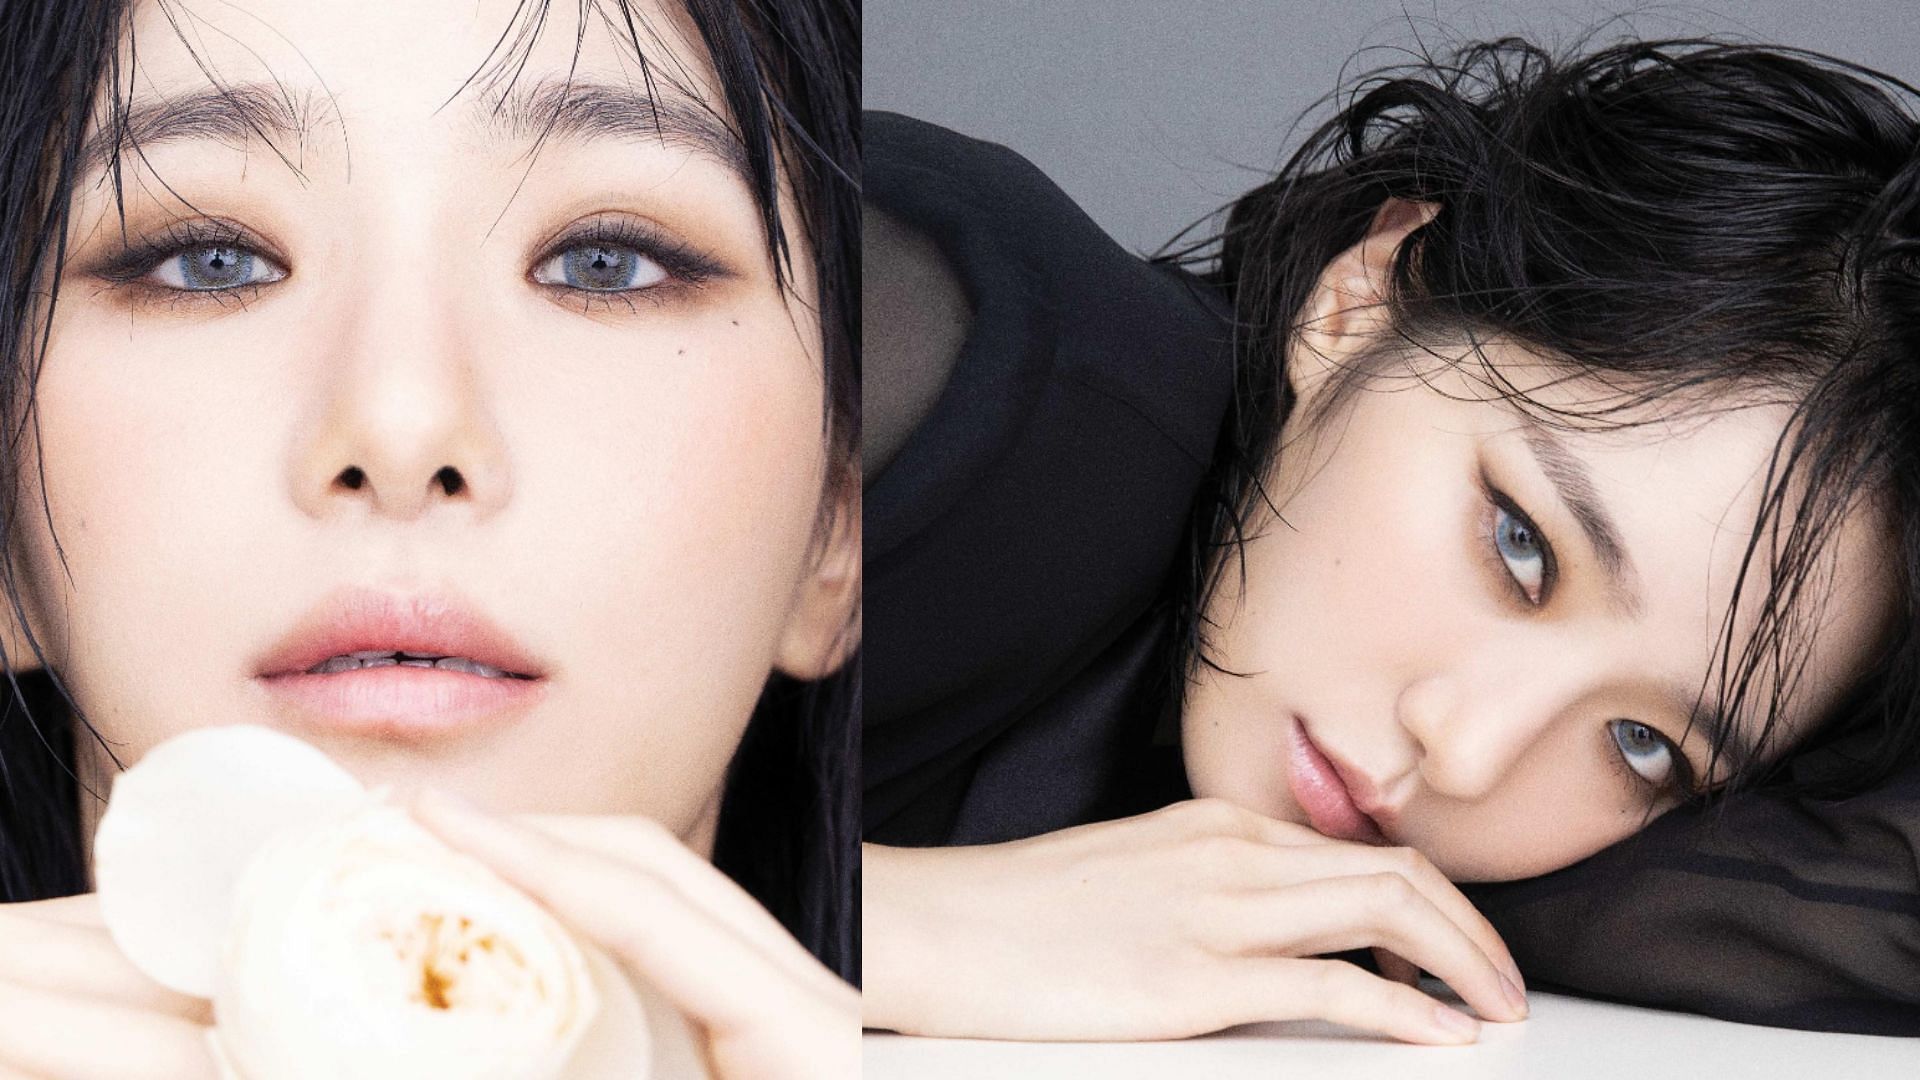 Park Gyu-young's look for her latest magazine pictorial wins the internet:  Handsomely pretty